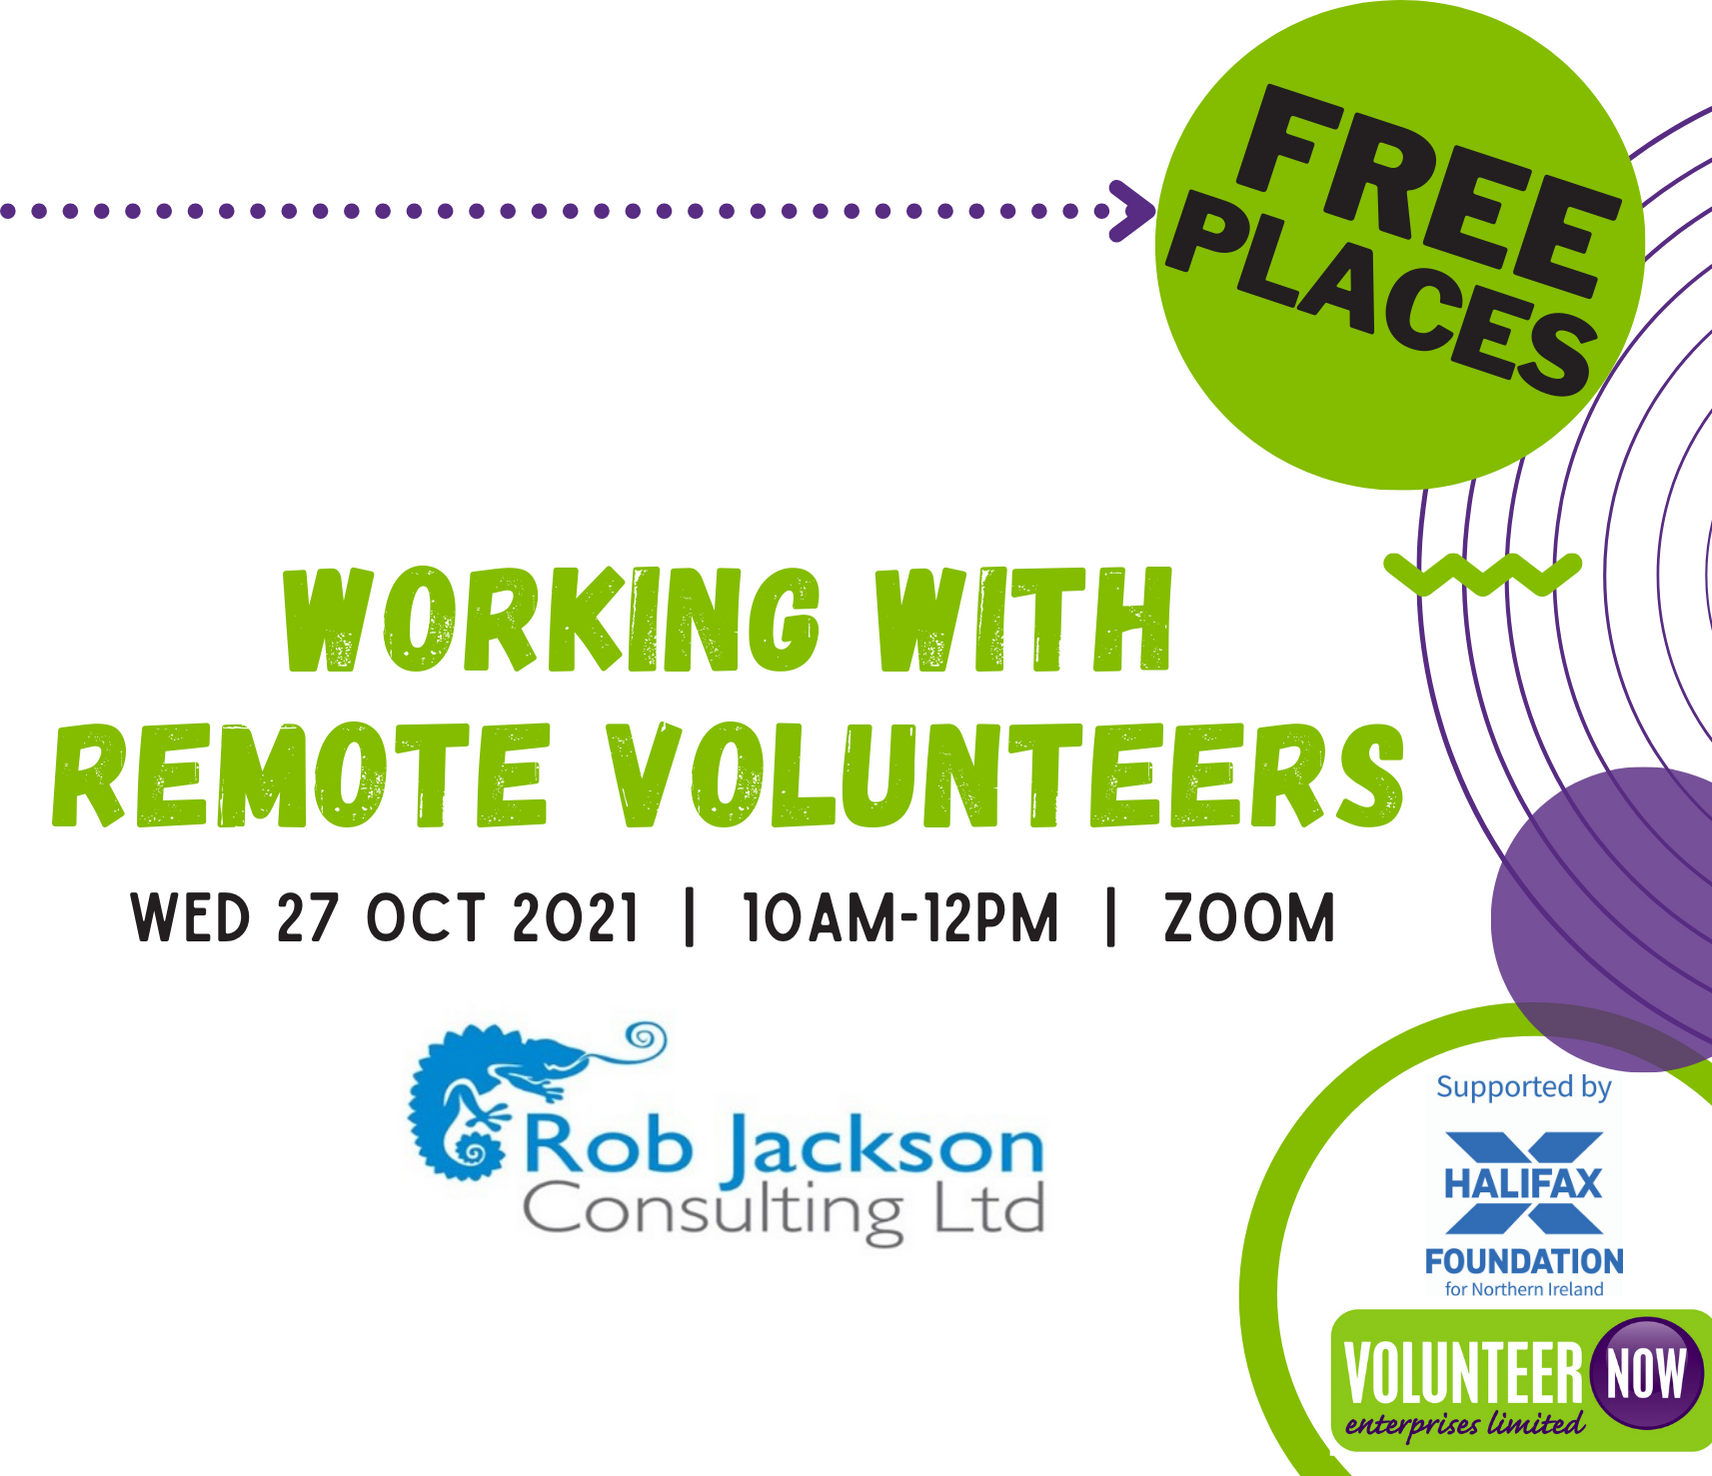 Working with Remote Volunteers